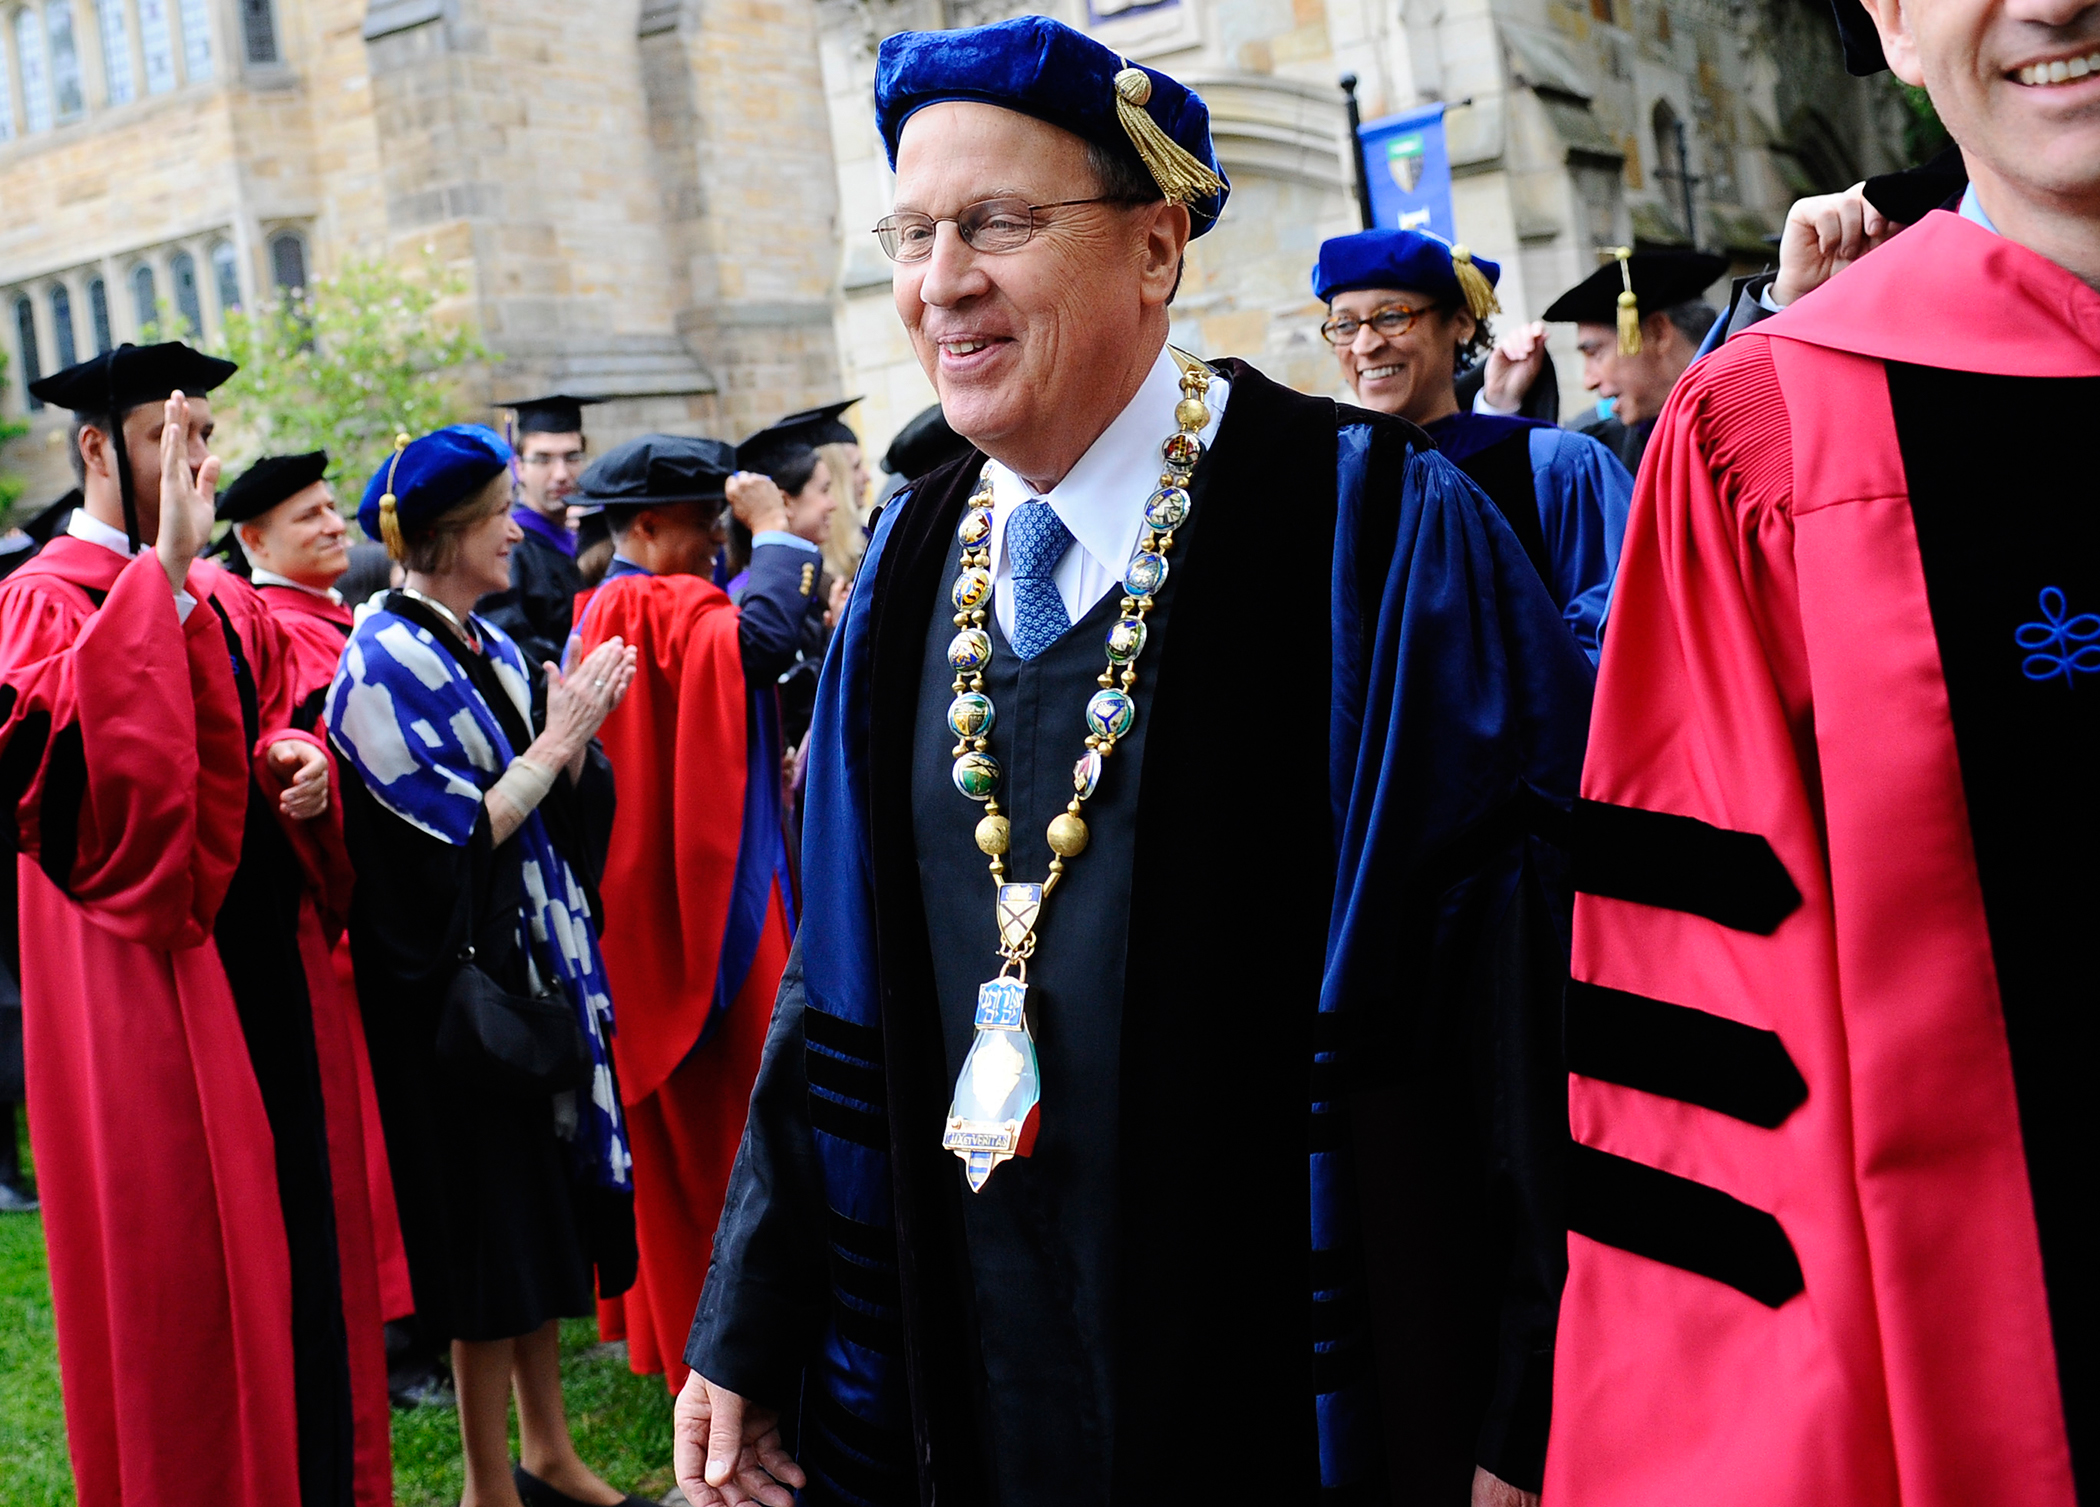 Yale President Richard Levin smiles as he walks in his final procession during commencement at Yale University in New Haven, Connecticut